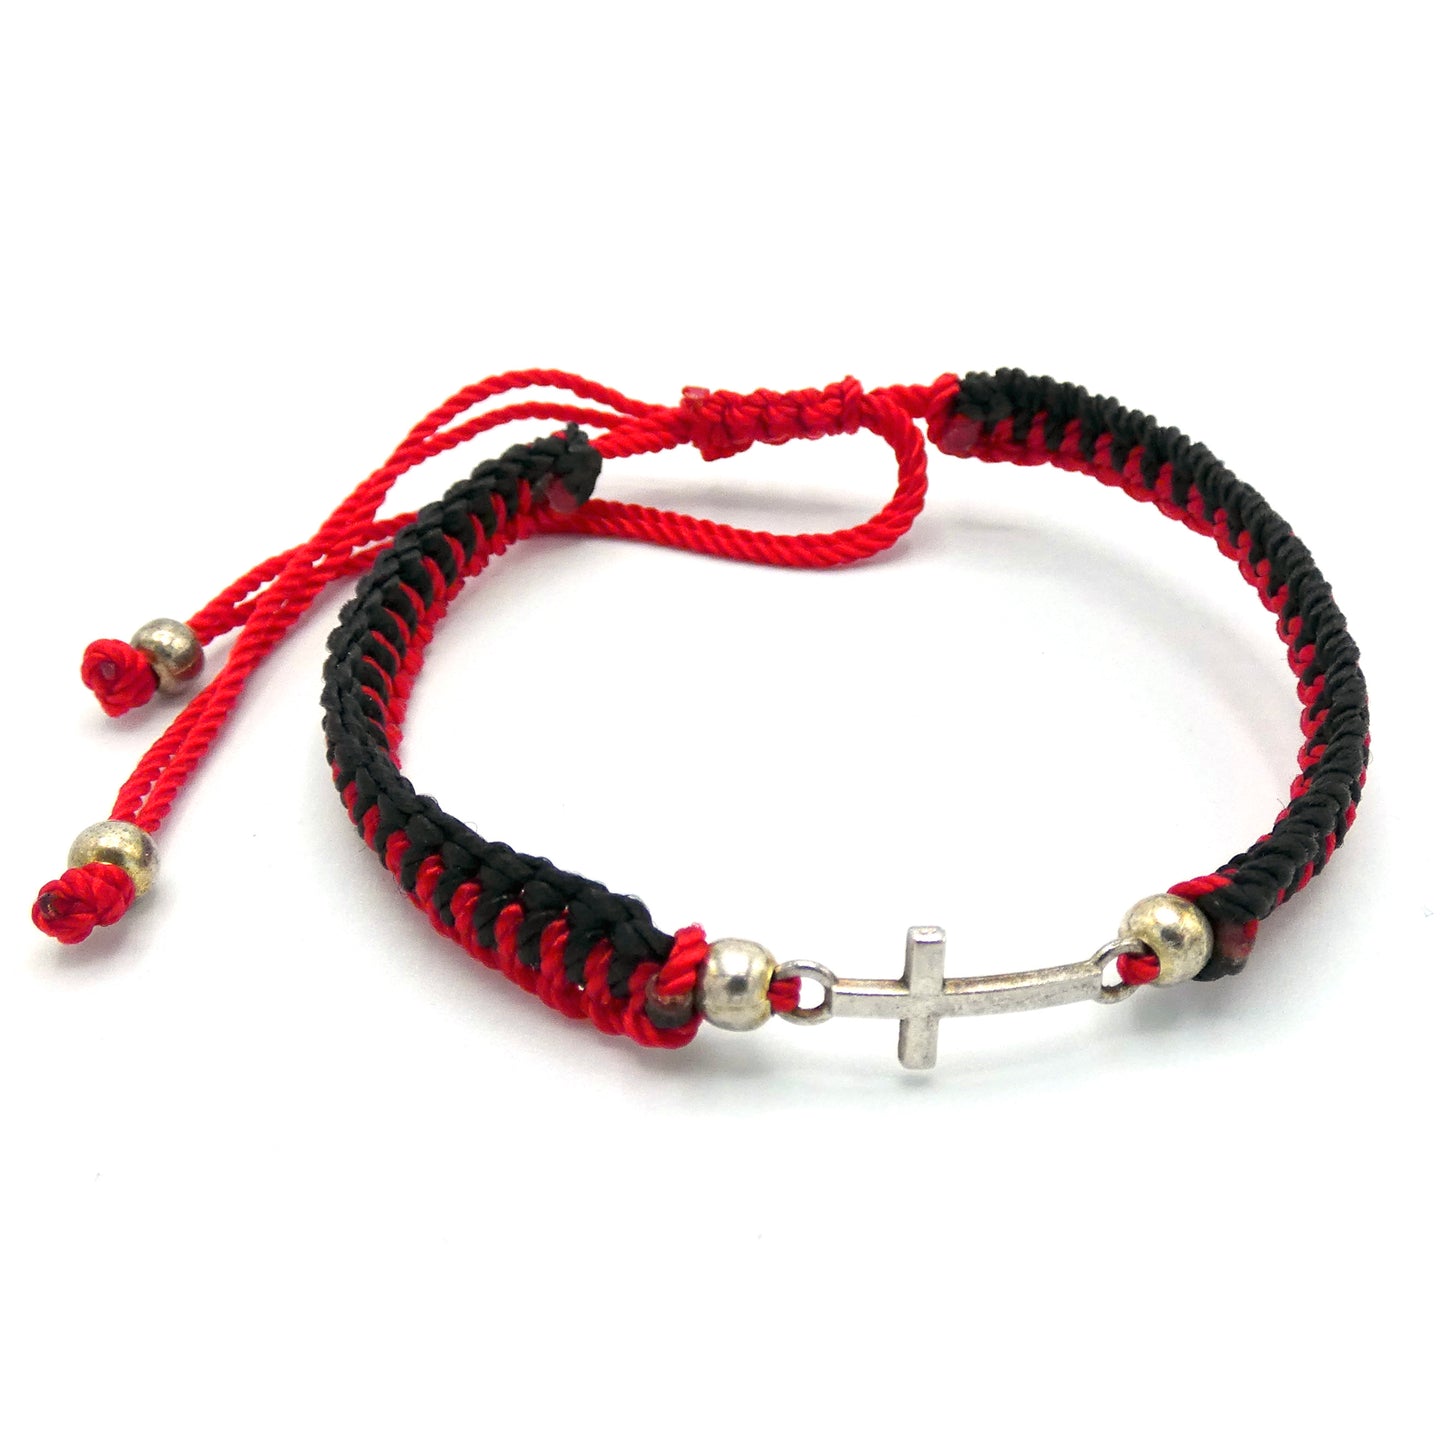 Braided Bracelet of Assorted Colors with Metal Cross